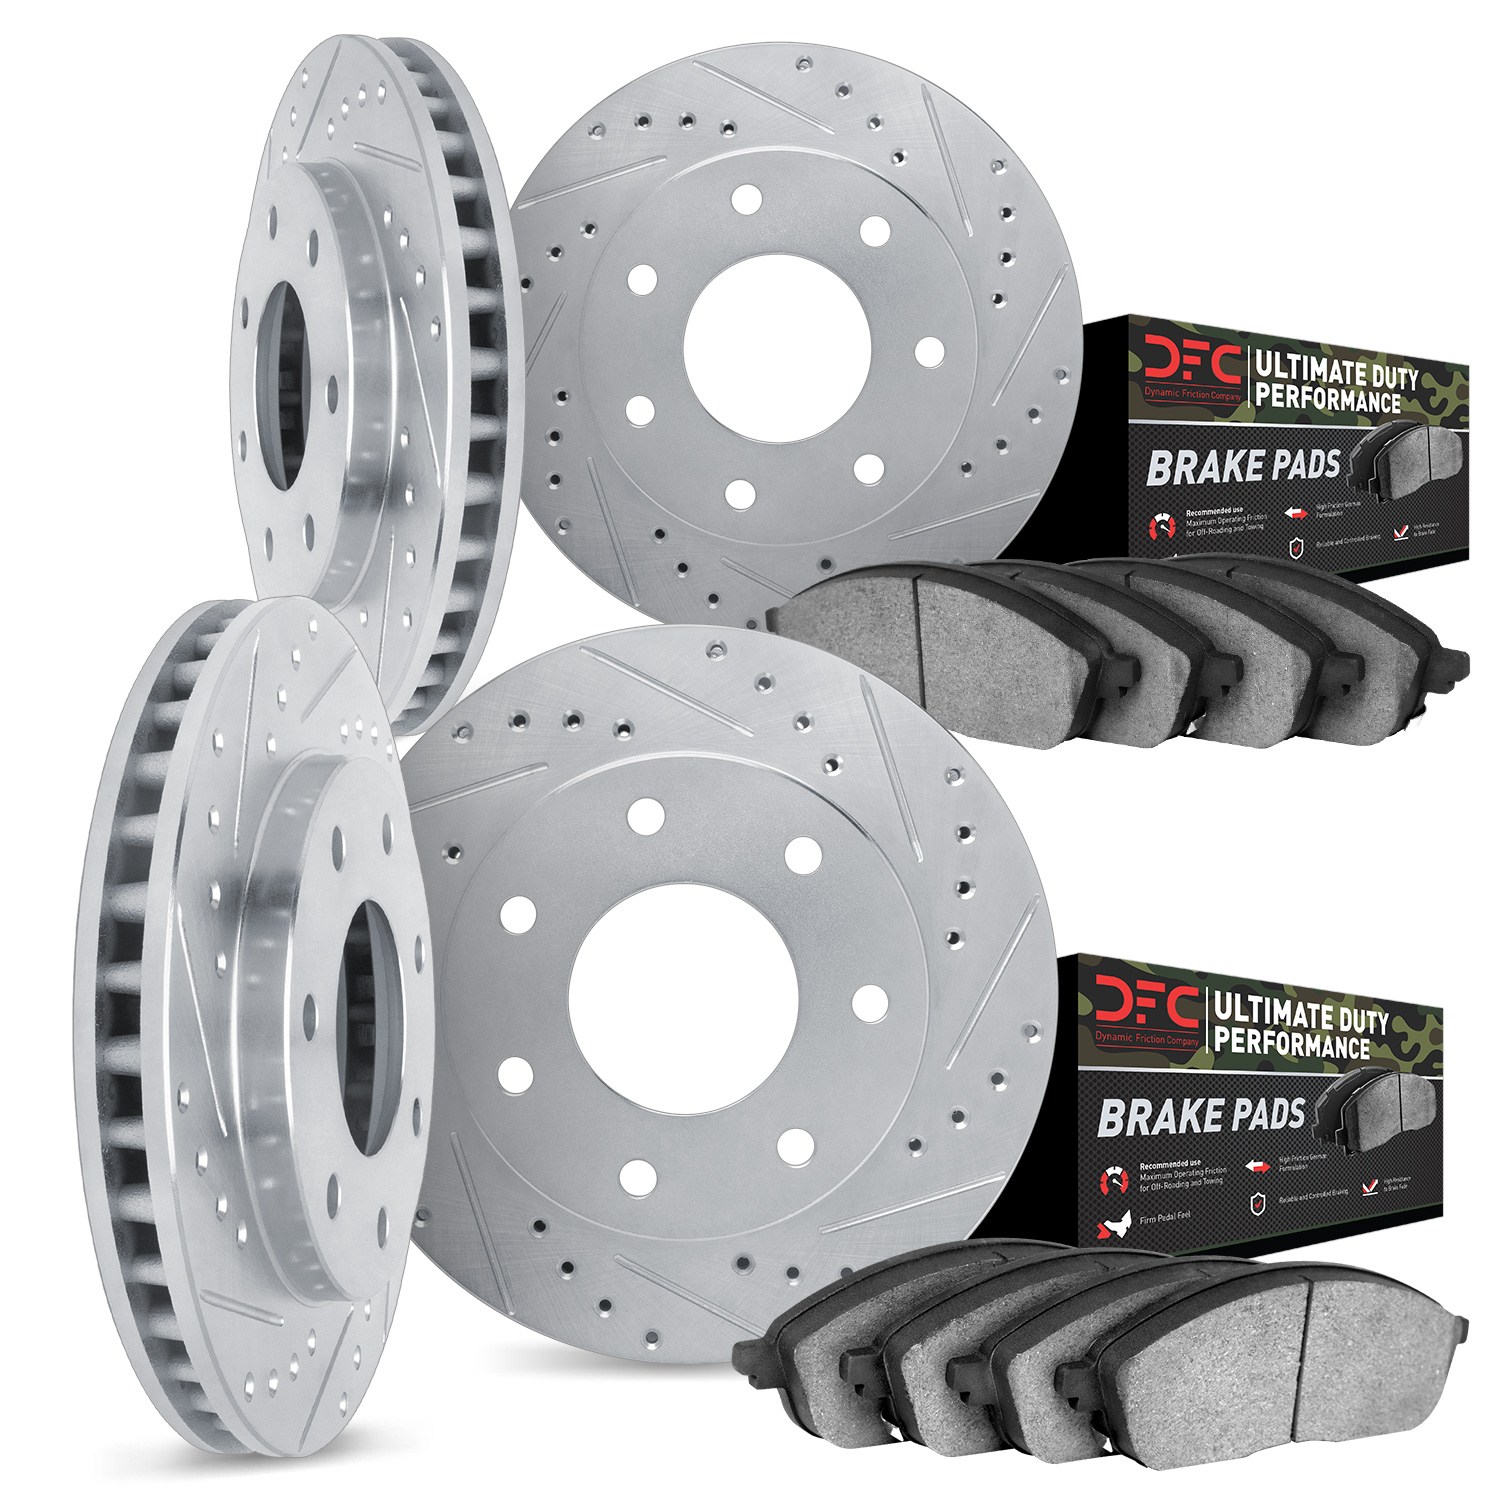 7404-54036 Drilled/Slotted Brake Rotors with Ultimate-Duty Brake Pads Kit [Silver], 2009-2009 Ford/Lincoln/Mercury/Mazda, Positi